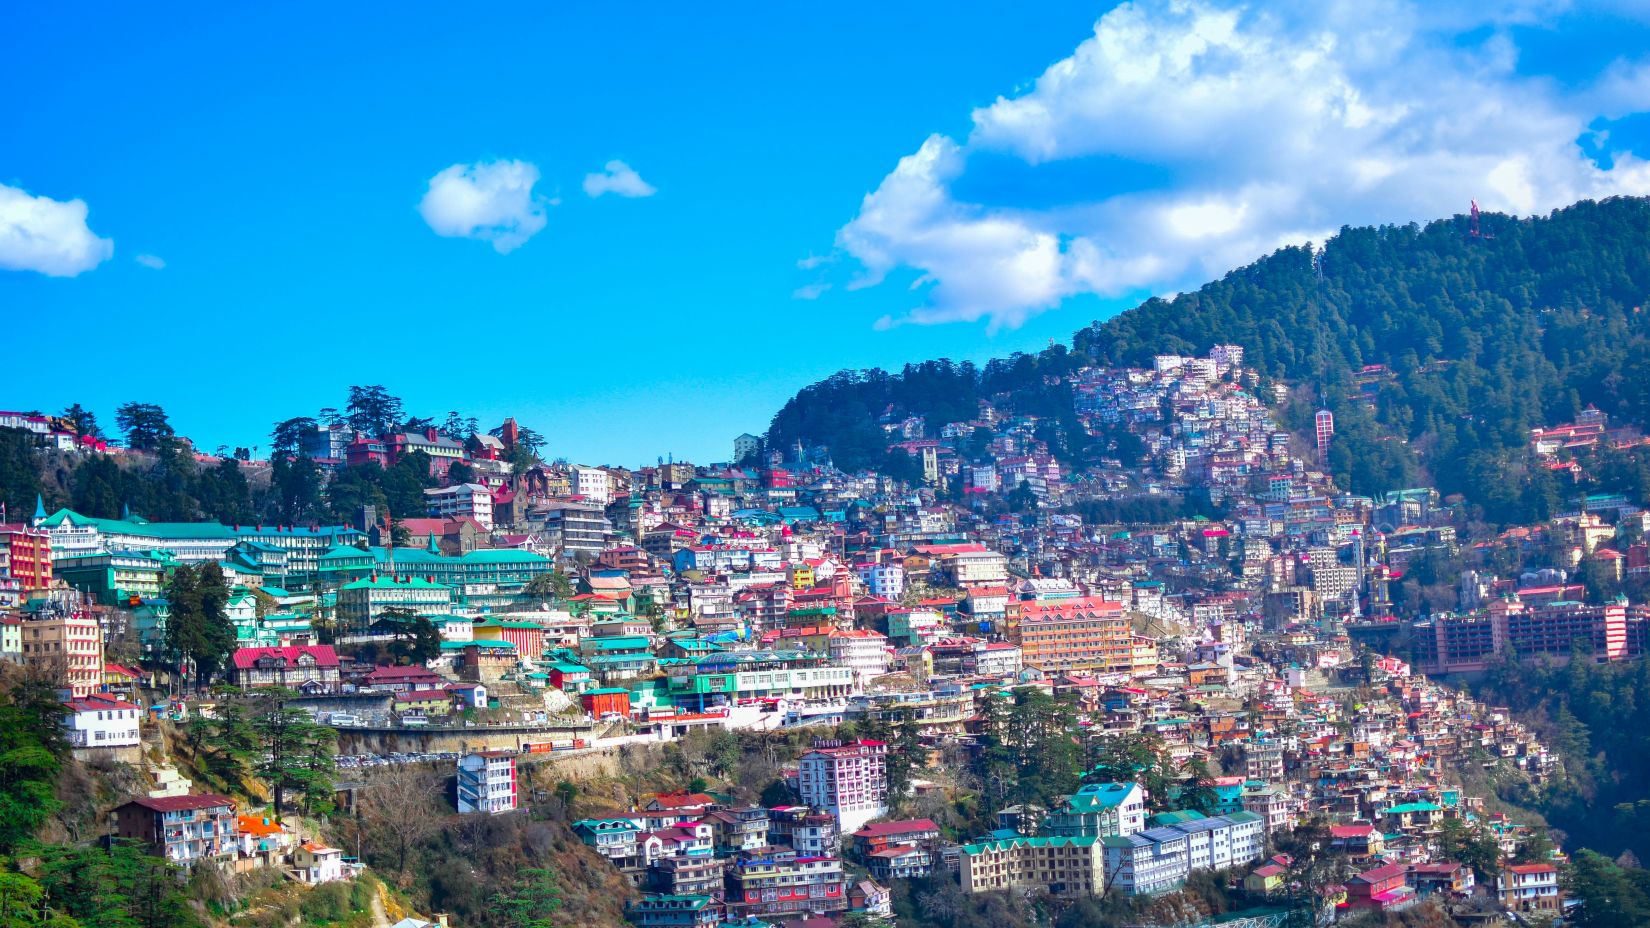 an overview of the town of Shimla with building on the hills and blue sky in the background